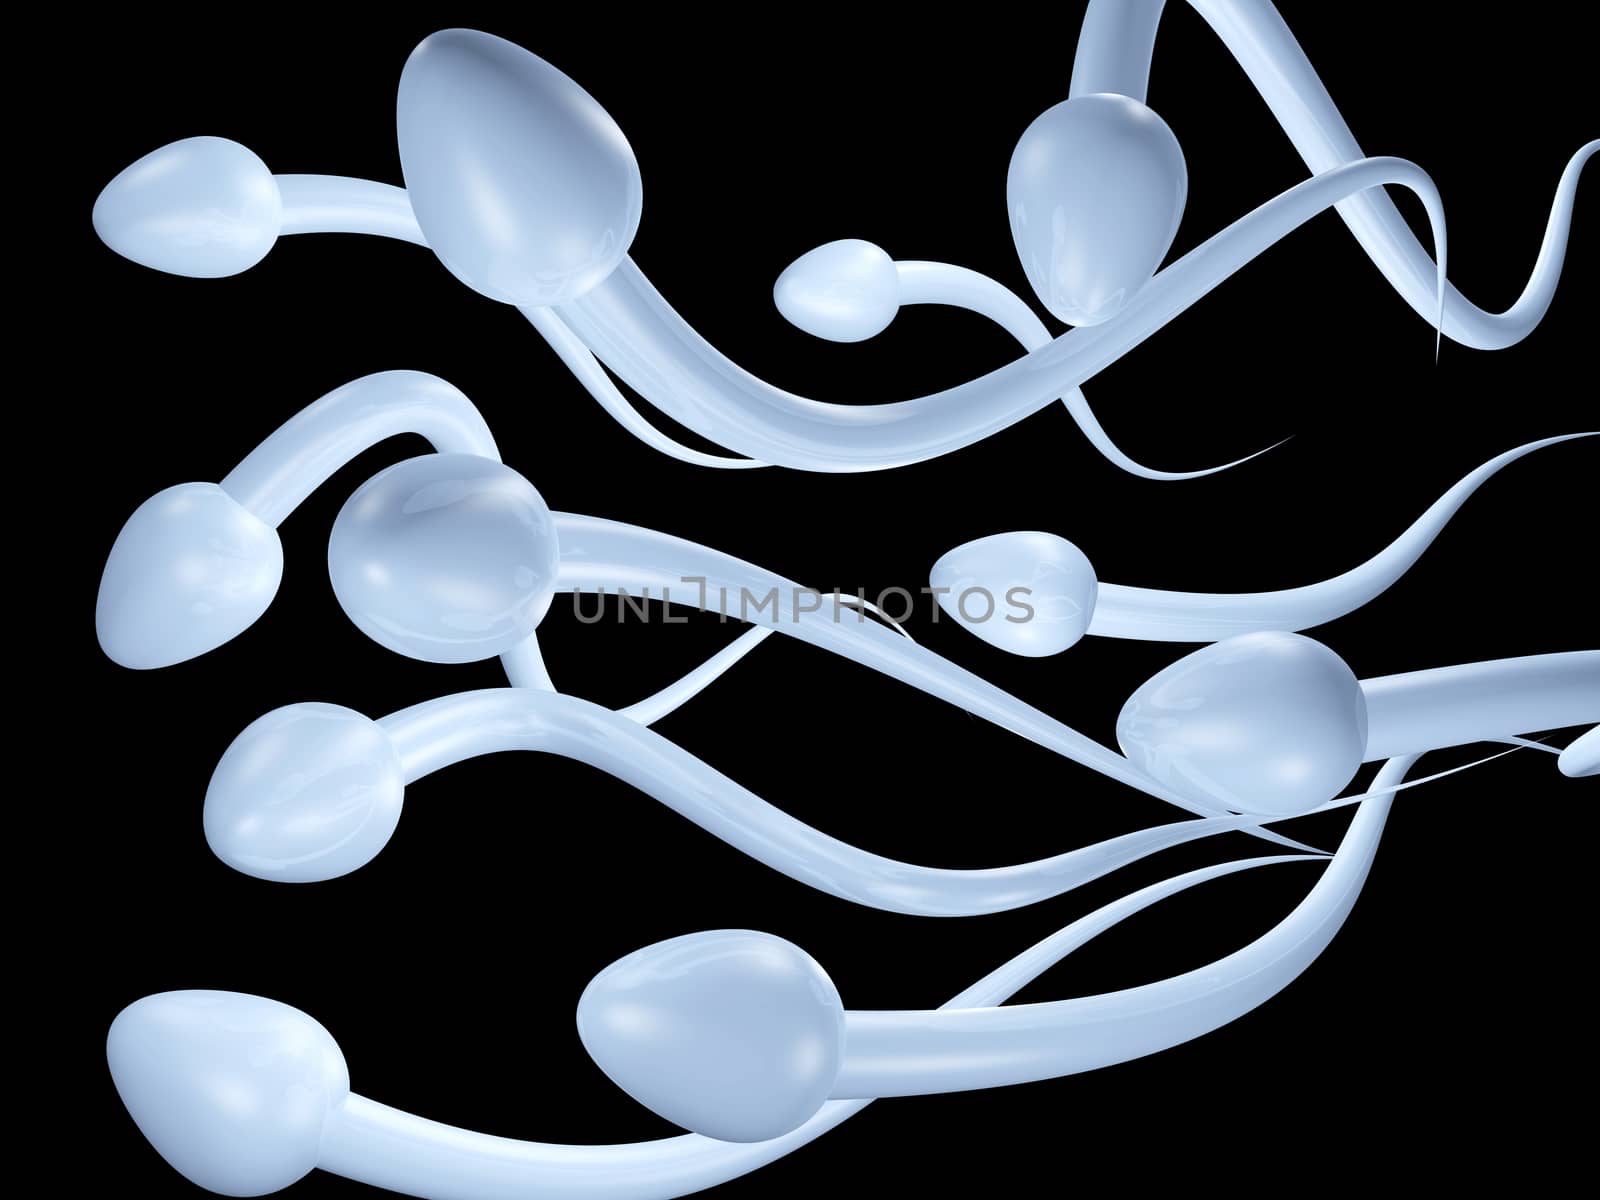 Sperms Swimming Illustrated in 3D by RichieThakur